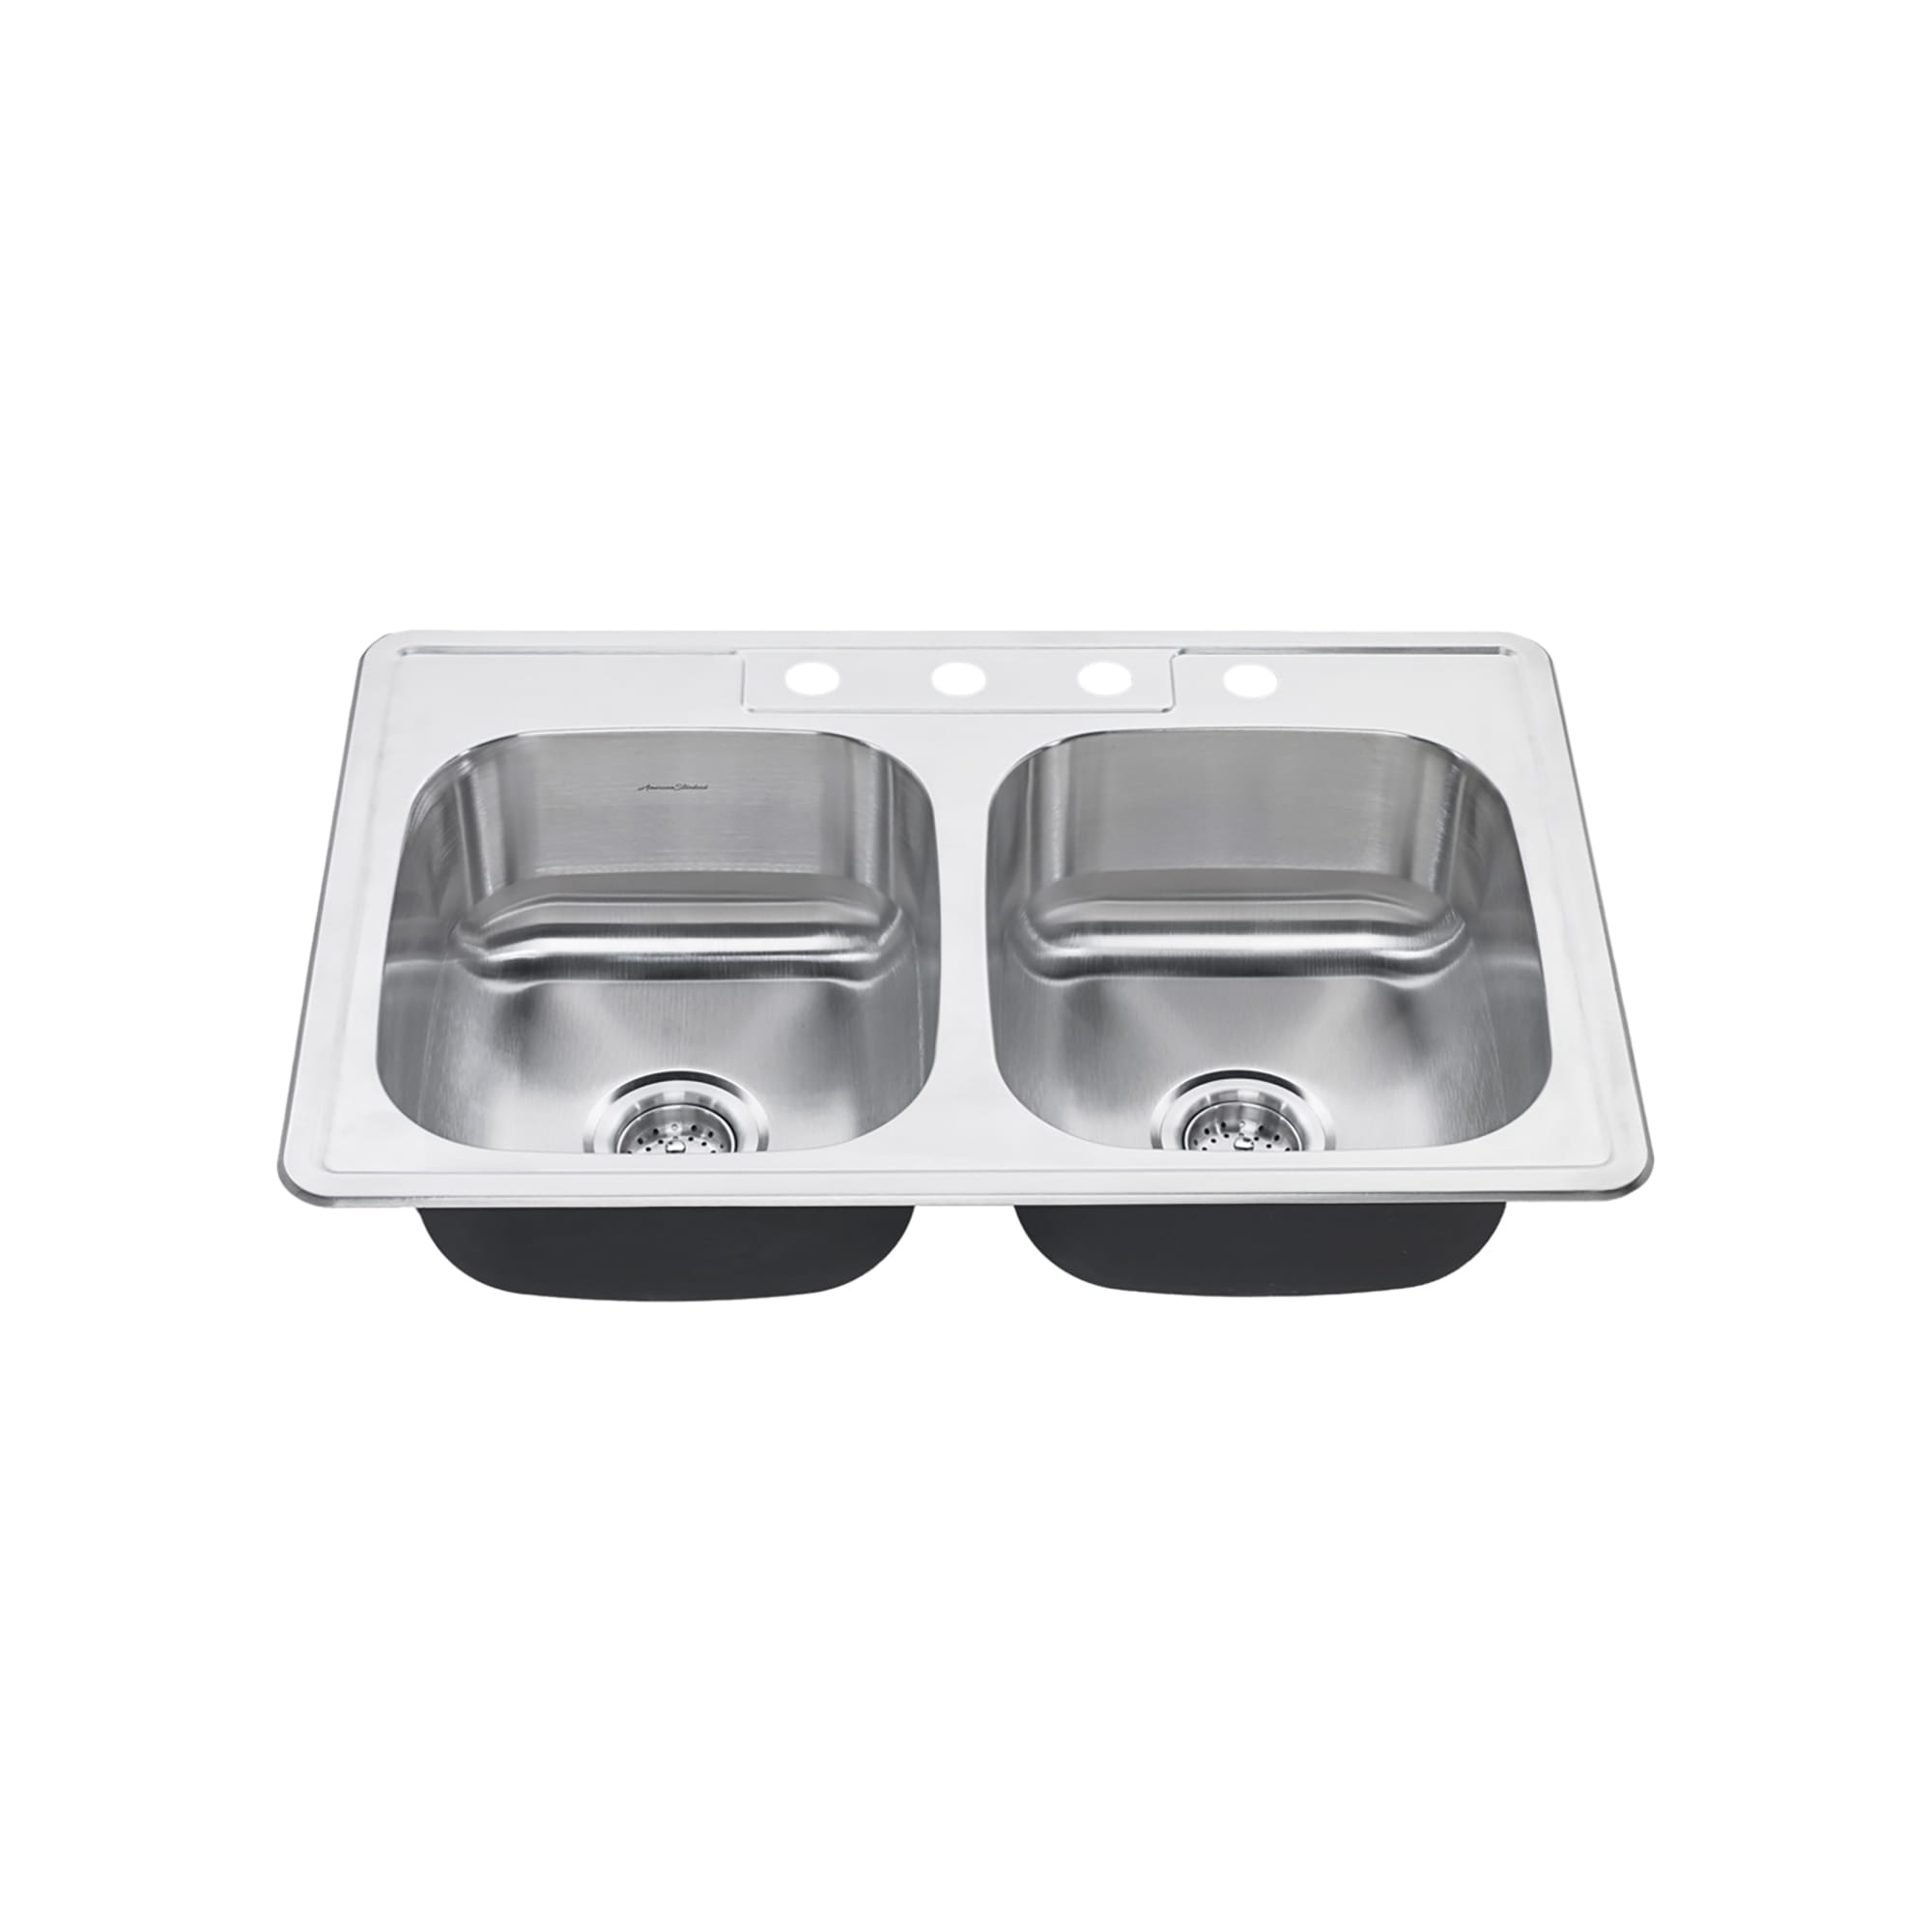 Colony® 33 x 22-Inch Stainless Steel 4-Hole Top Mount Double-Bowl ADA Kitchen Sink